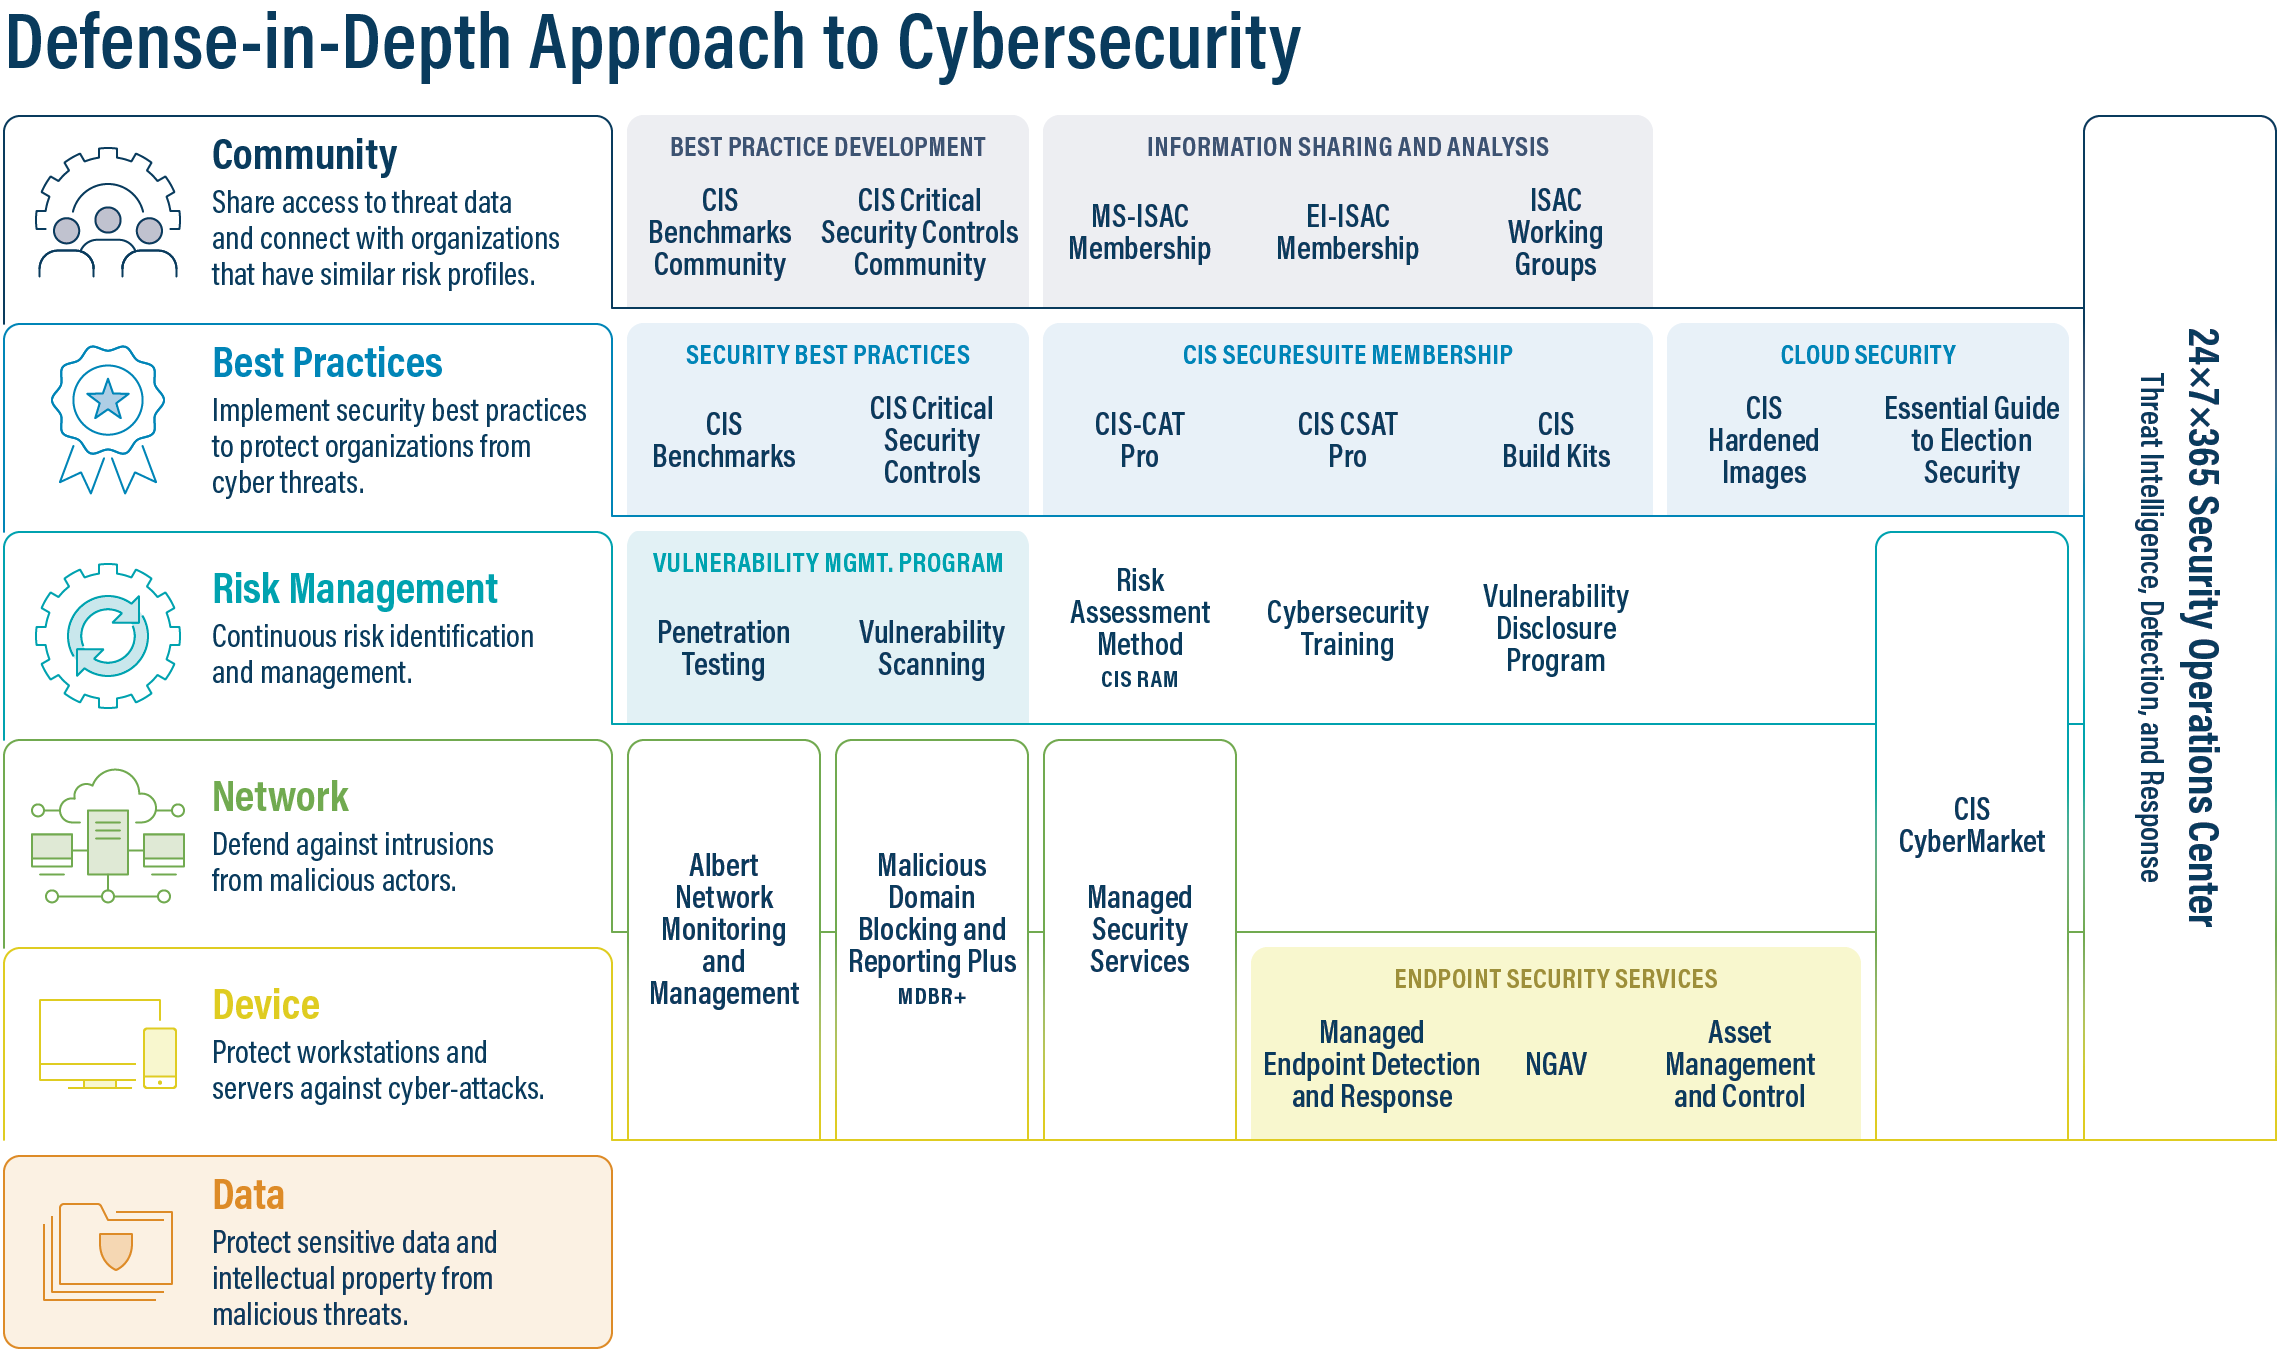 A graphic showing the various activities necessary to build a defense-in-depth cybersecurity posture